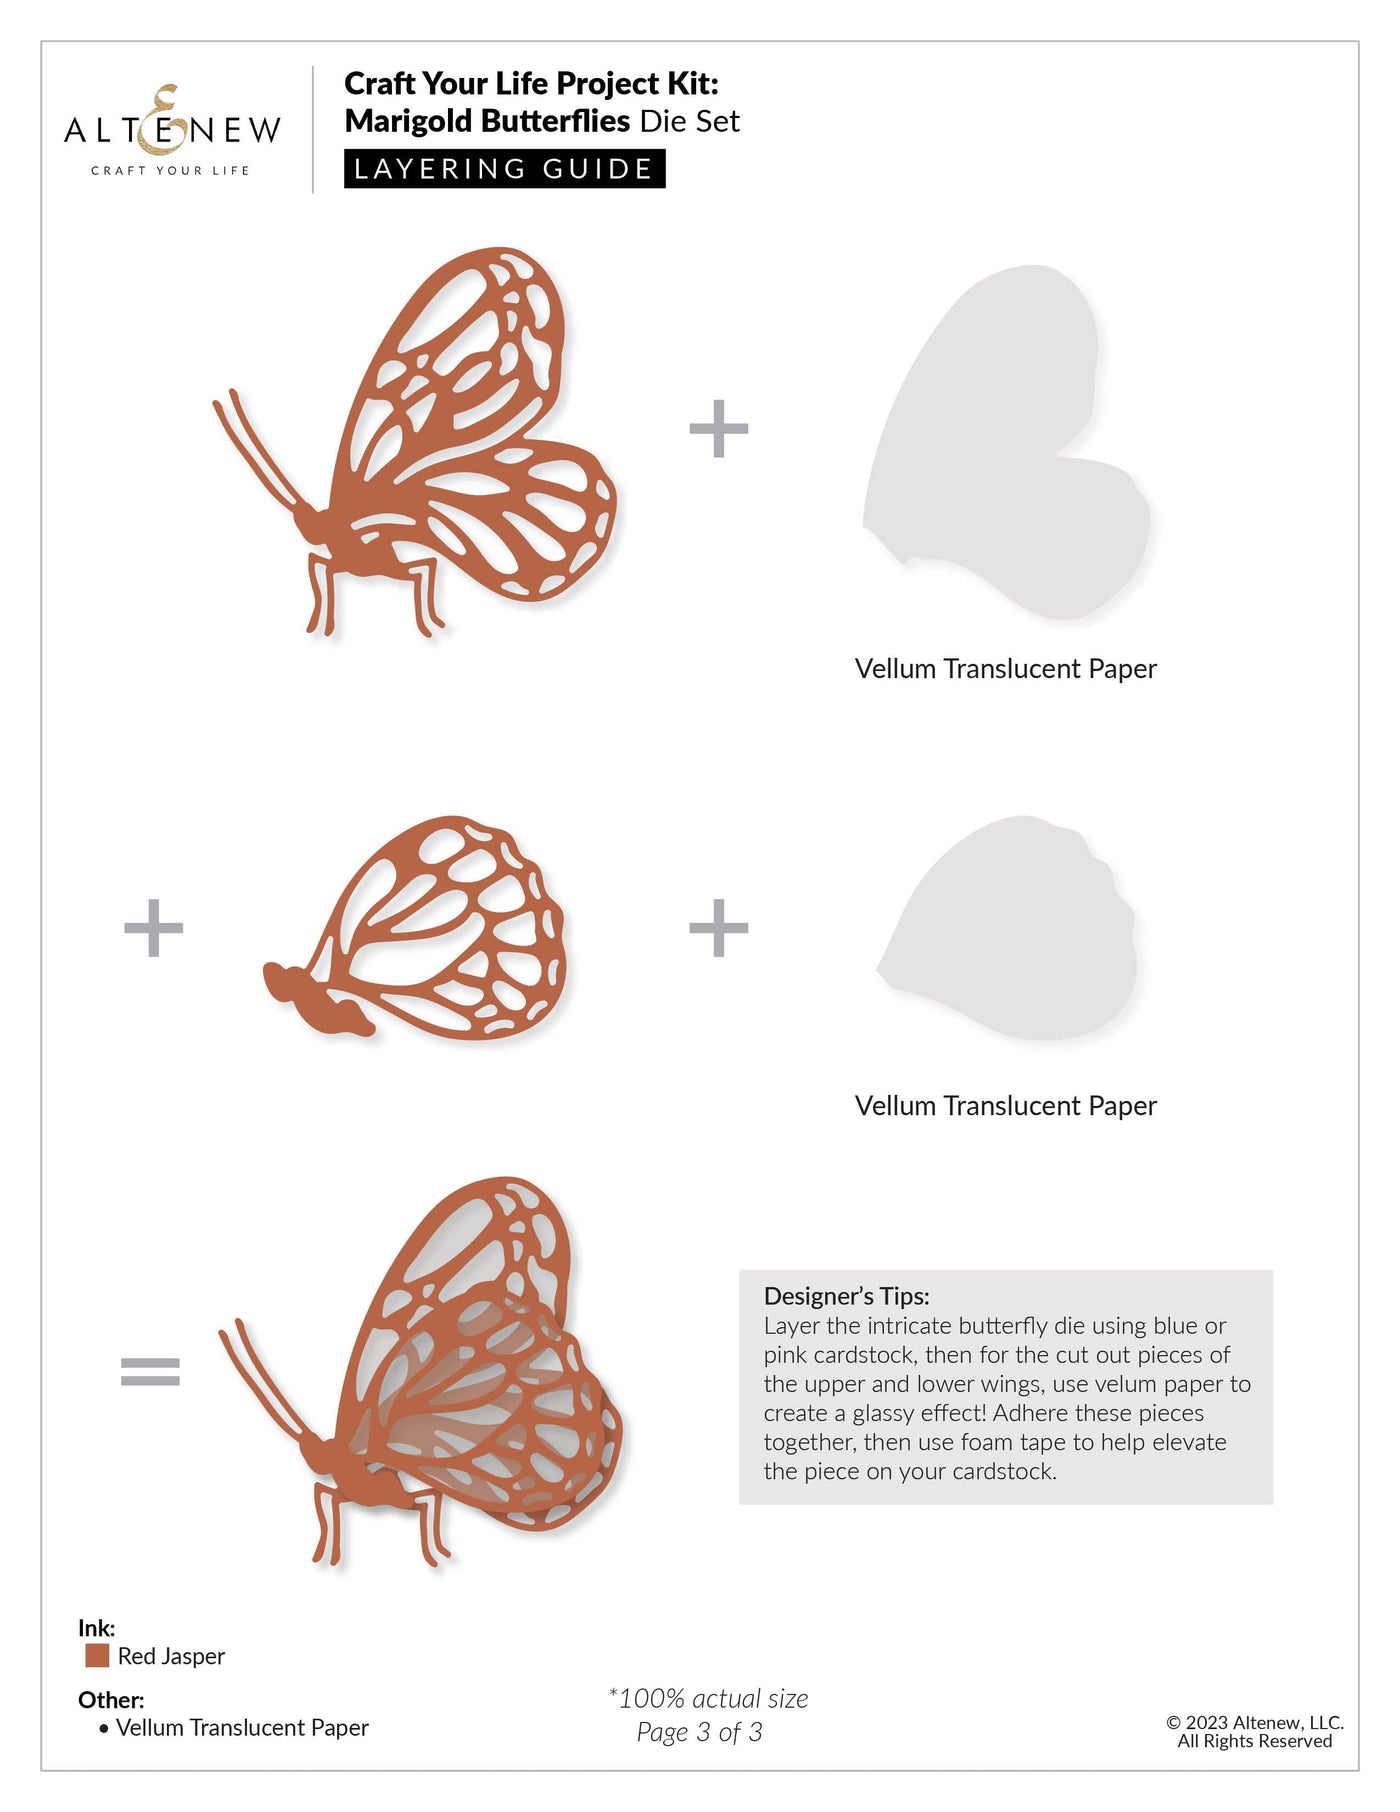 Altenew Craft Your Life Project Kit Craft Your Life Project Kit: Marigold Butterflies